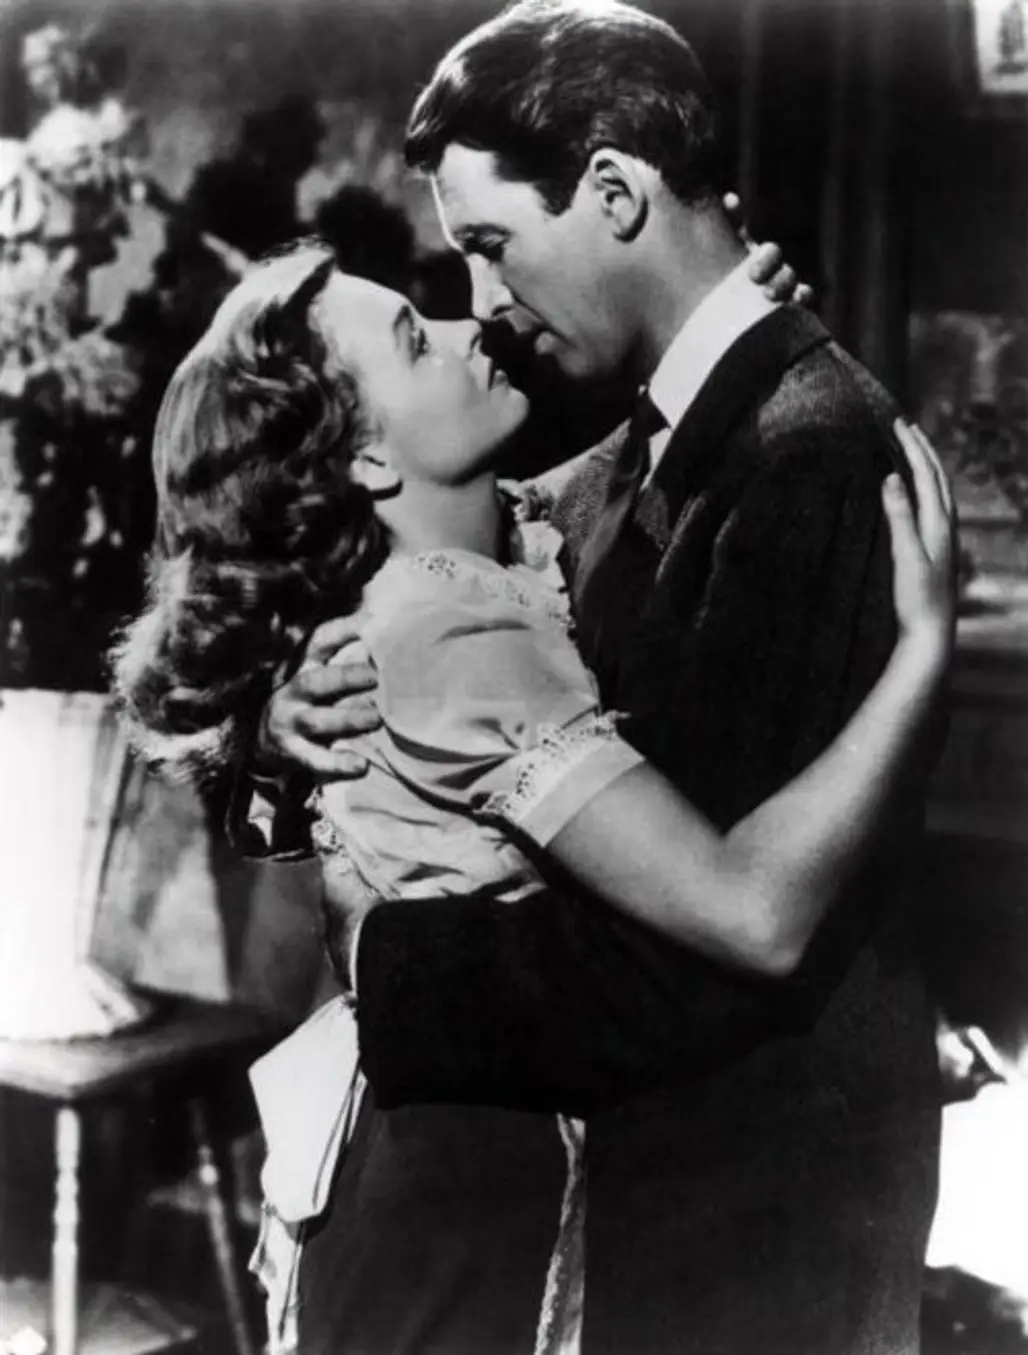 George and Mary, "It's a Wonderful Life"